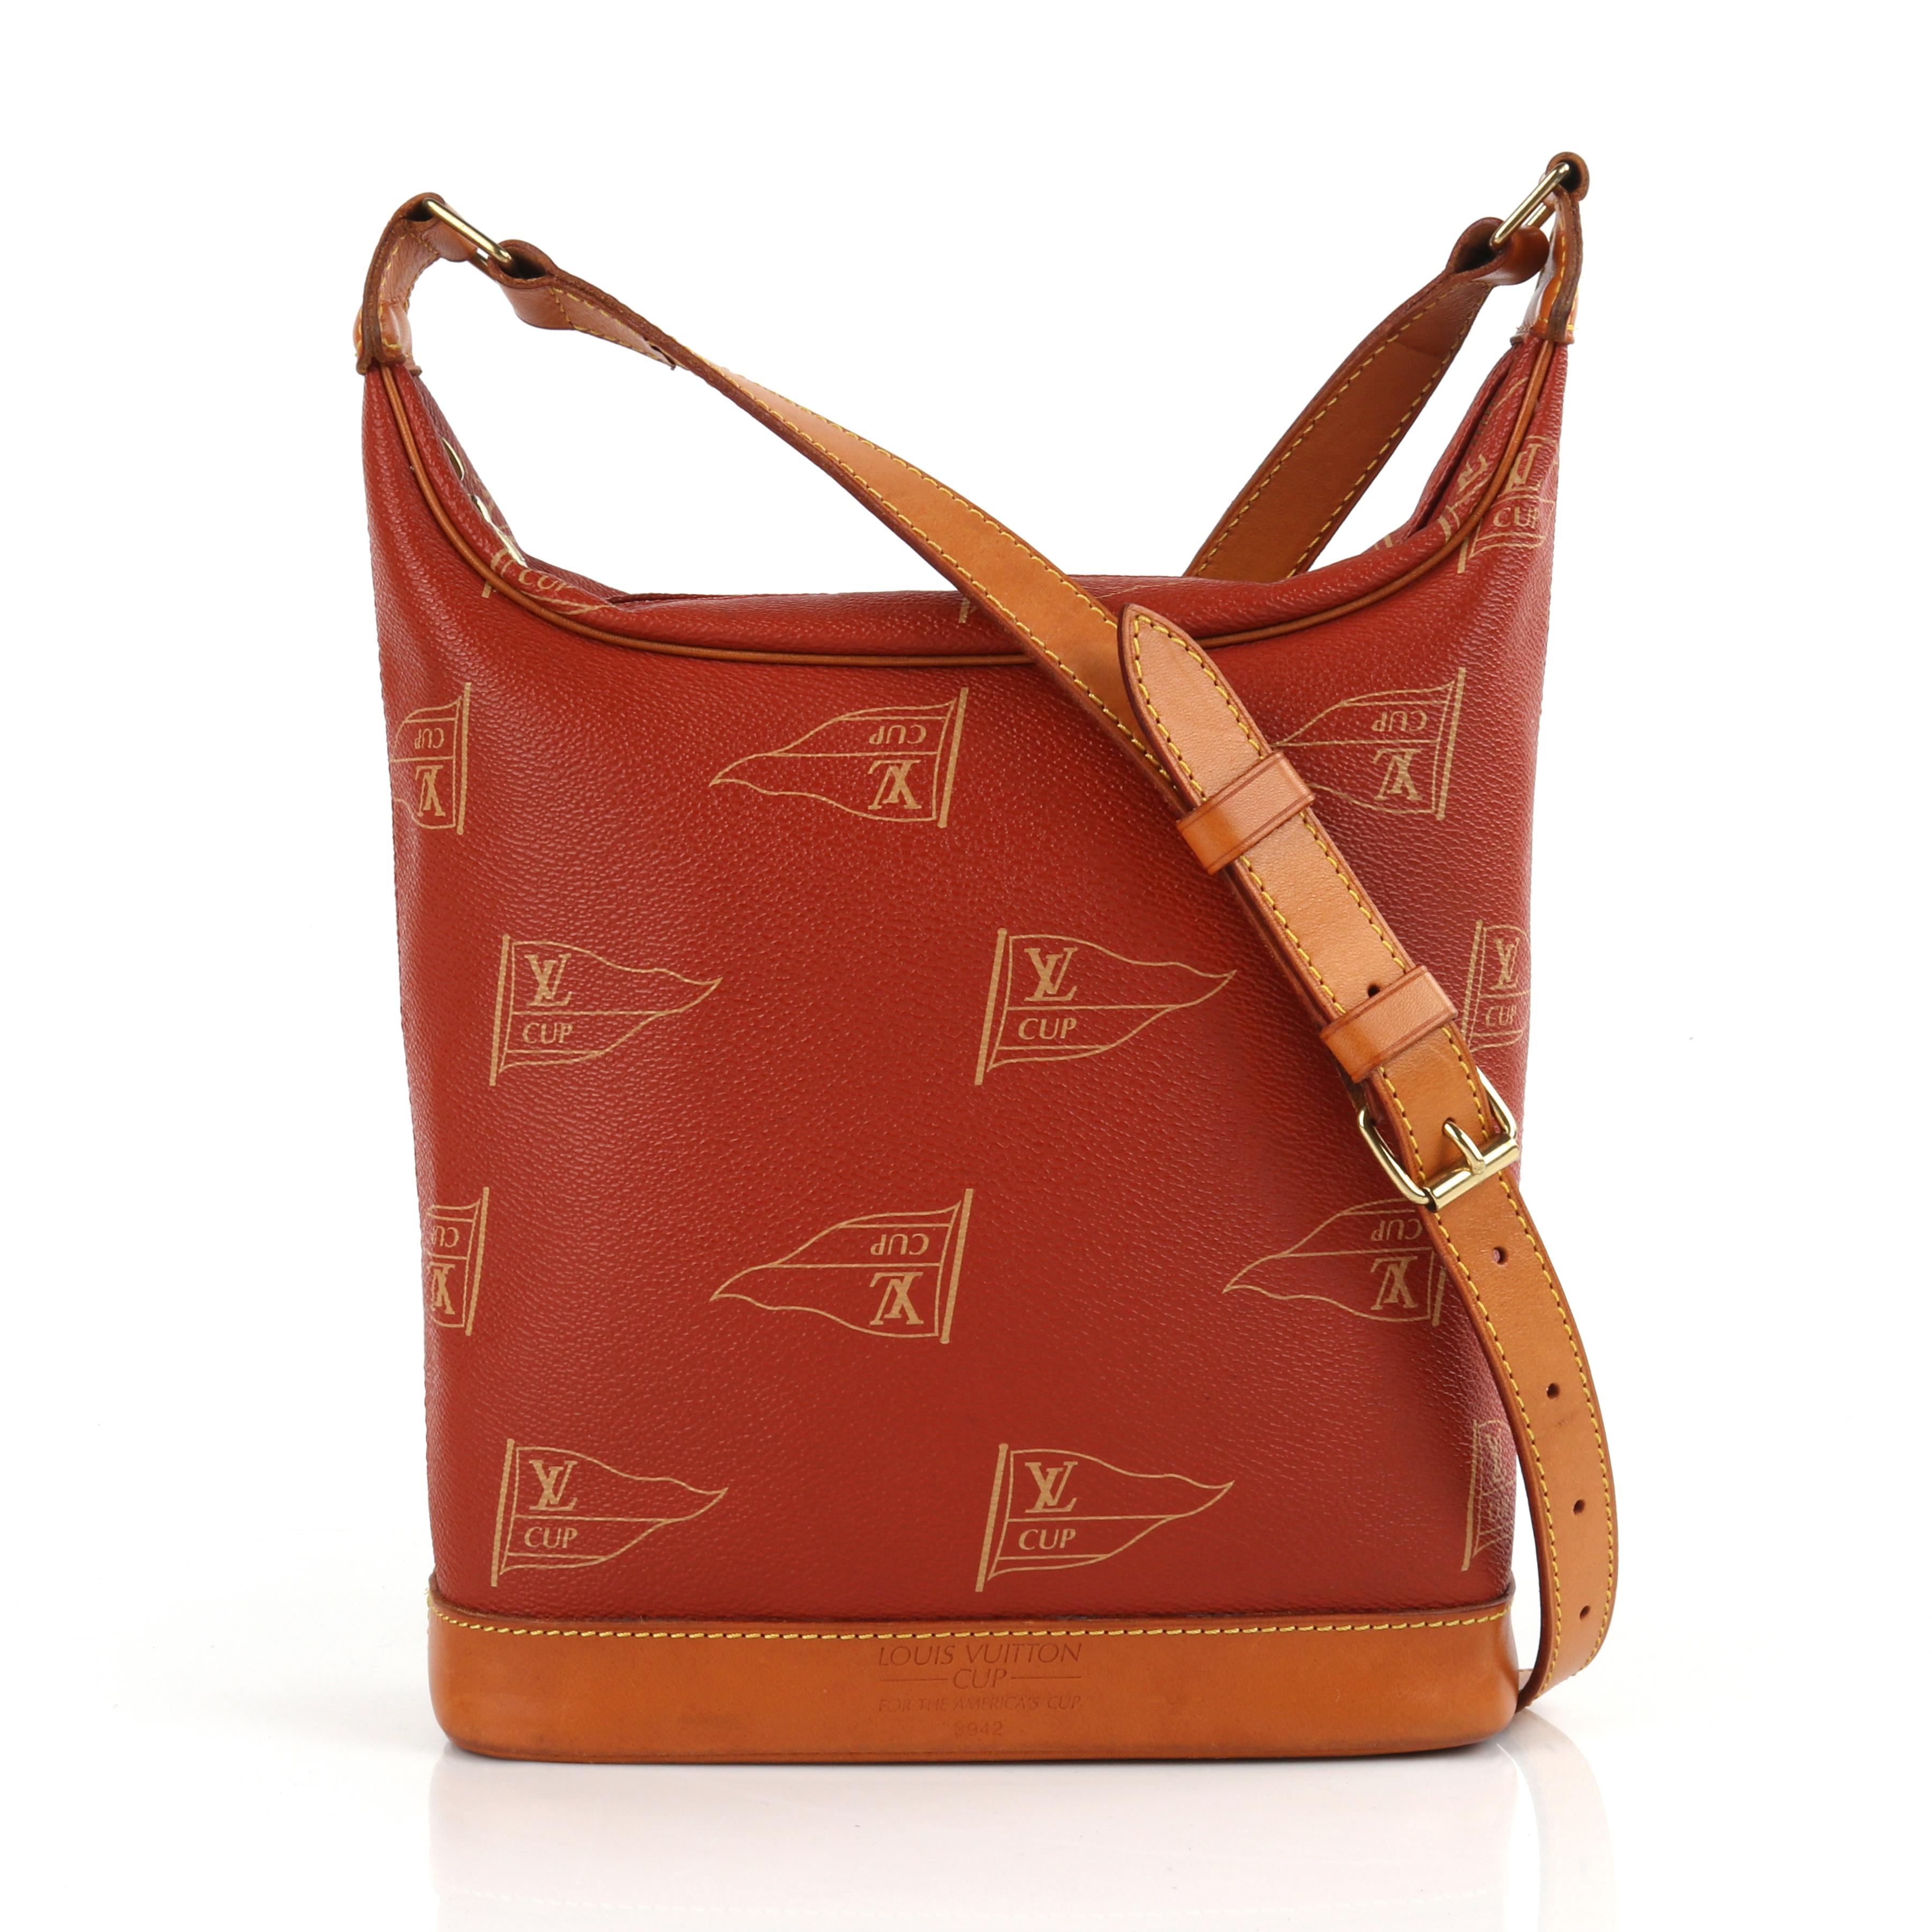 LOUIS VUITTON Limited Edition 1994 “Cup Le Touquet” Red Tan Shoulder Crossbody
 
Brand / Manufacturer: Louis Vuitton
Year: 1994
Manufacturer Style Name: Cup Le Touquet Shoulder Bag
Color(s): Shades of red, tan, and gold
Lined: Yes 
Unmarked Fabric